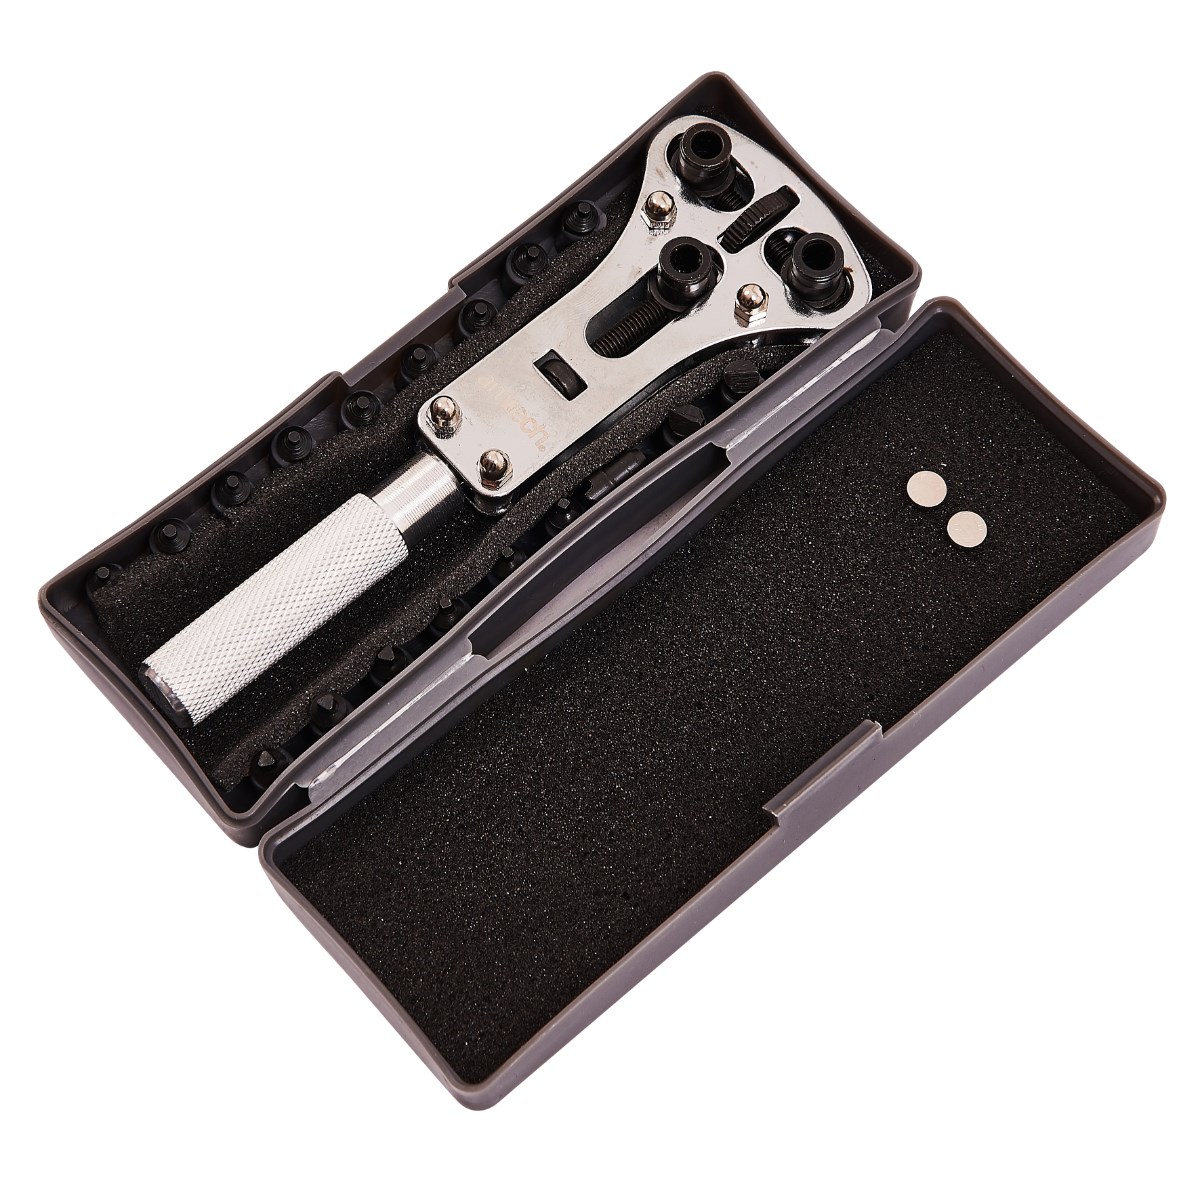 Universal Watch Repair Back Case Opener Wrench Screw Cover Remover Tool Kit